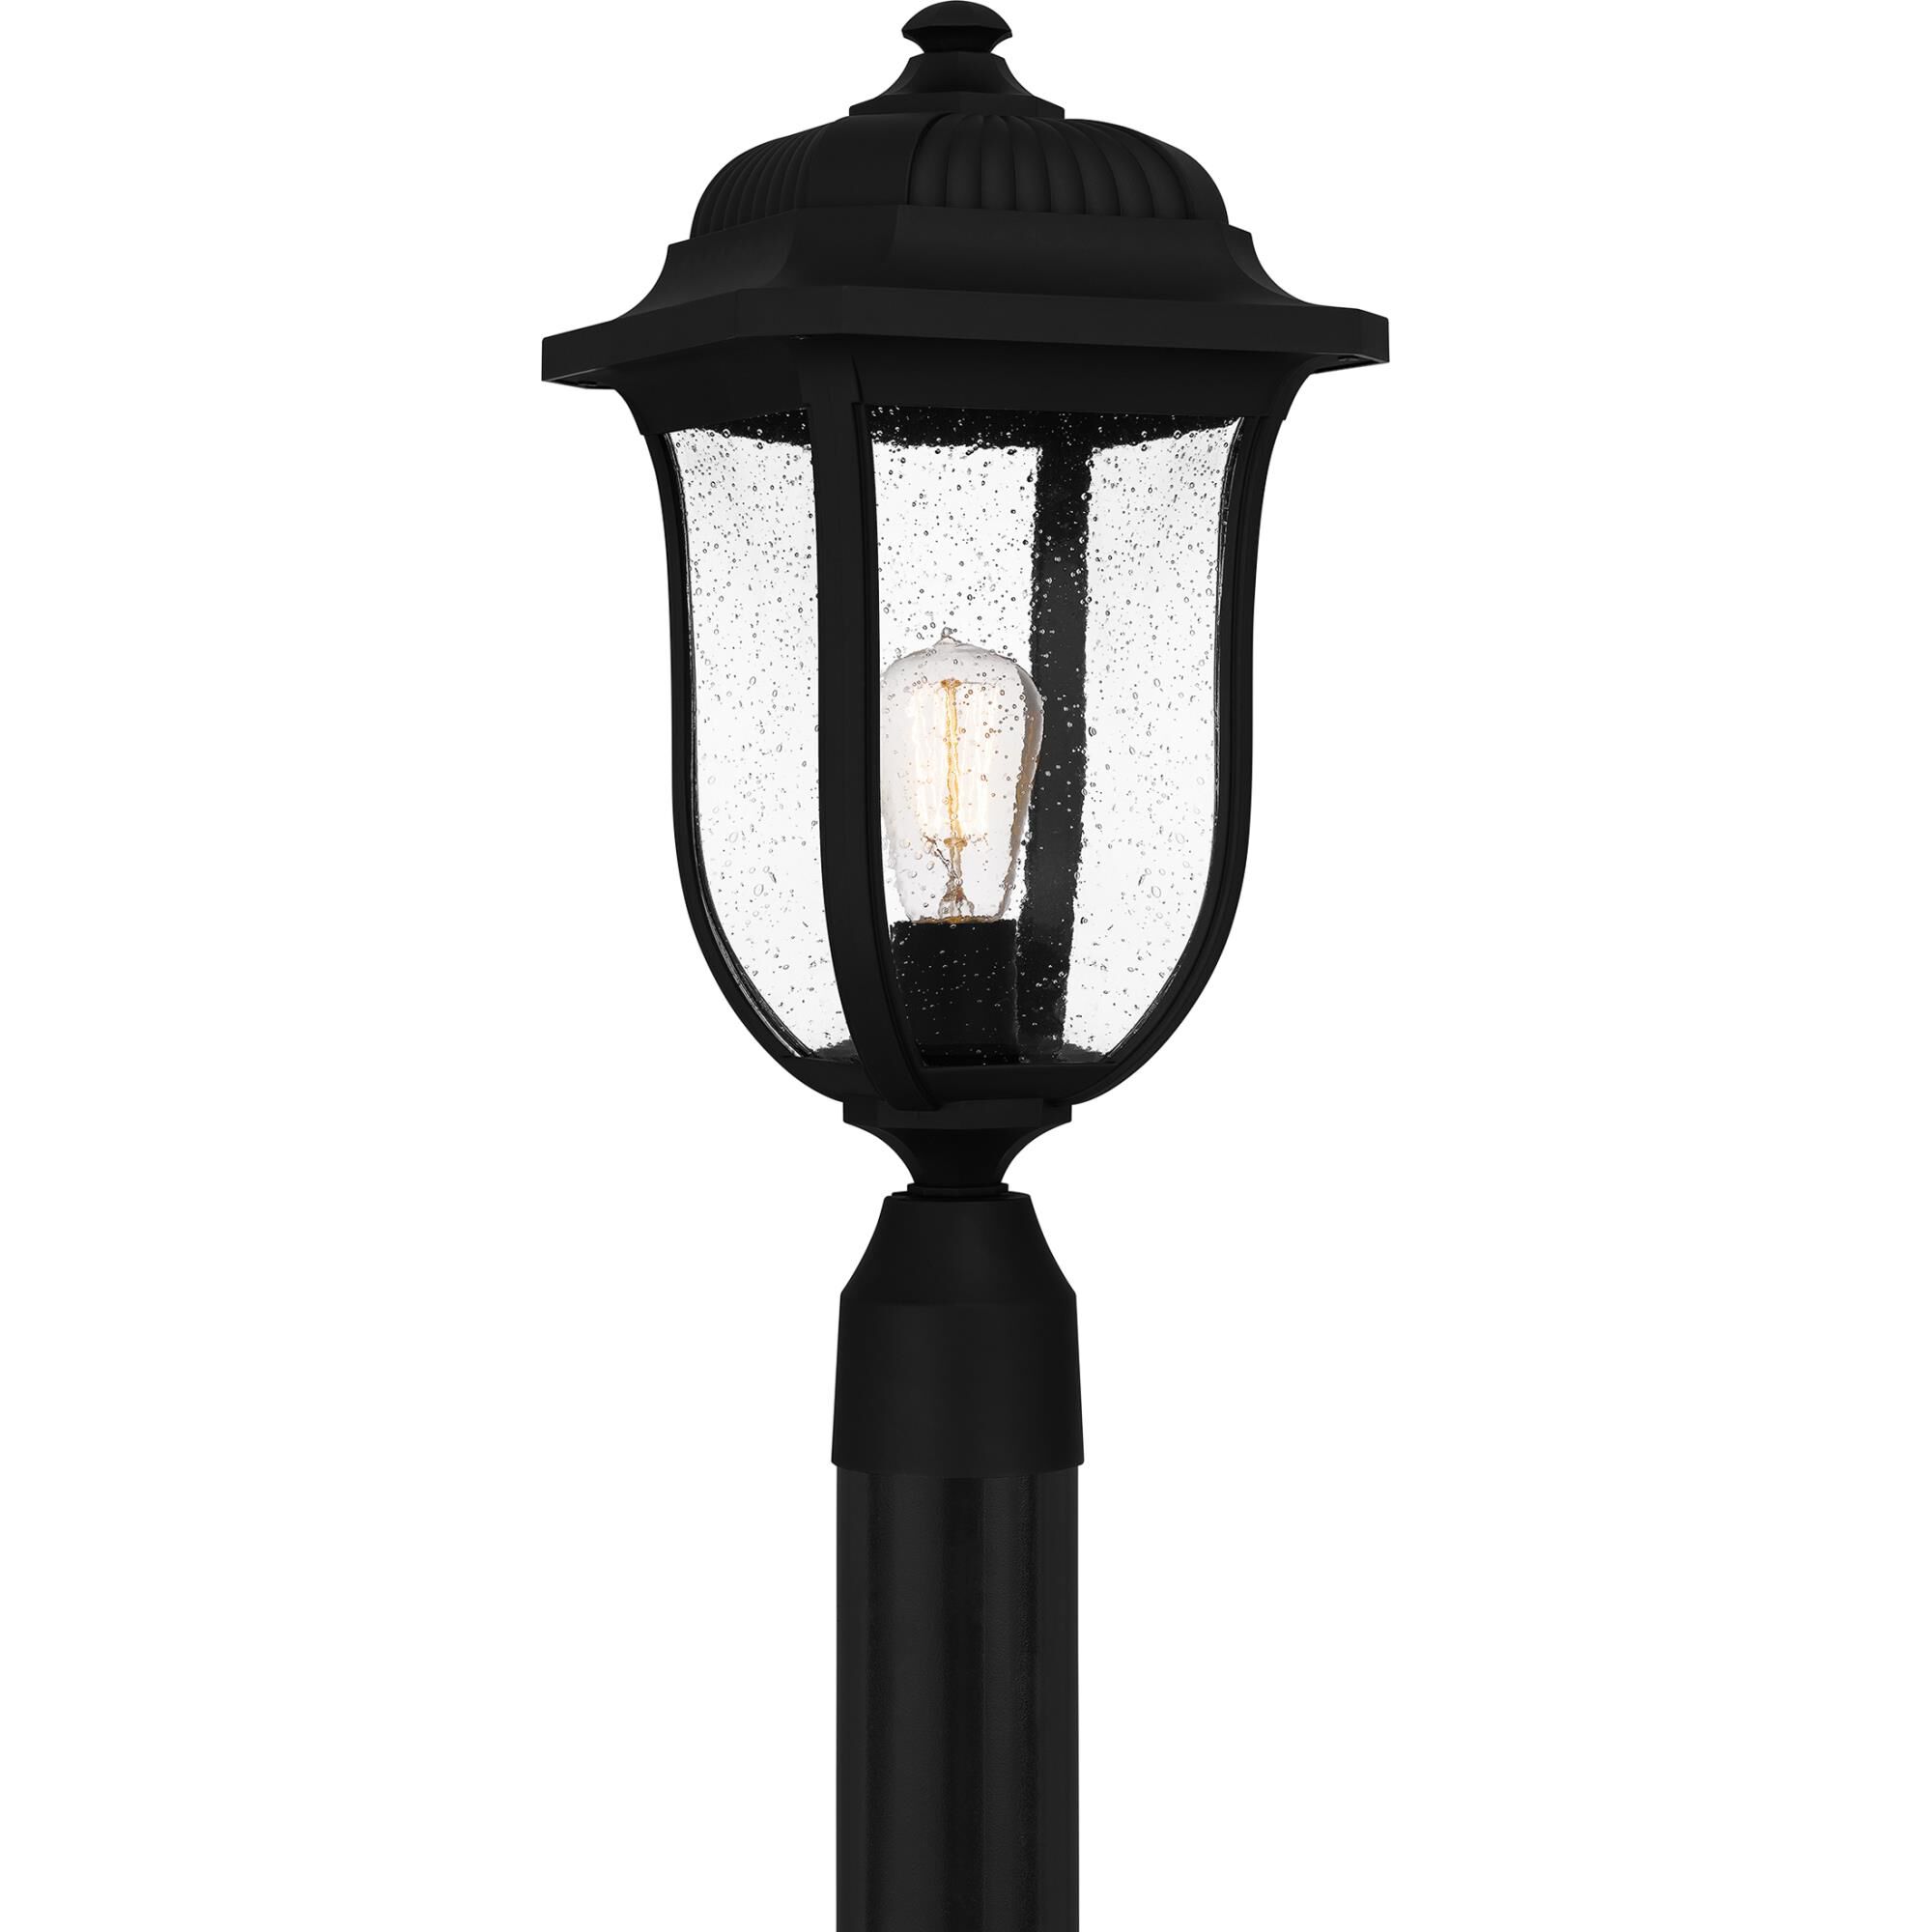 Photos - Floodlight / Garden Lamps Quoizel Mulberry 19 Inch Tall Outdoor Post Lamp Mulberry - MUL9009MBK - Tr 